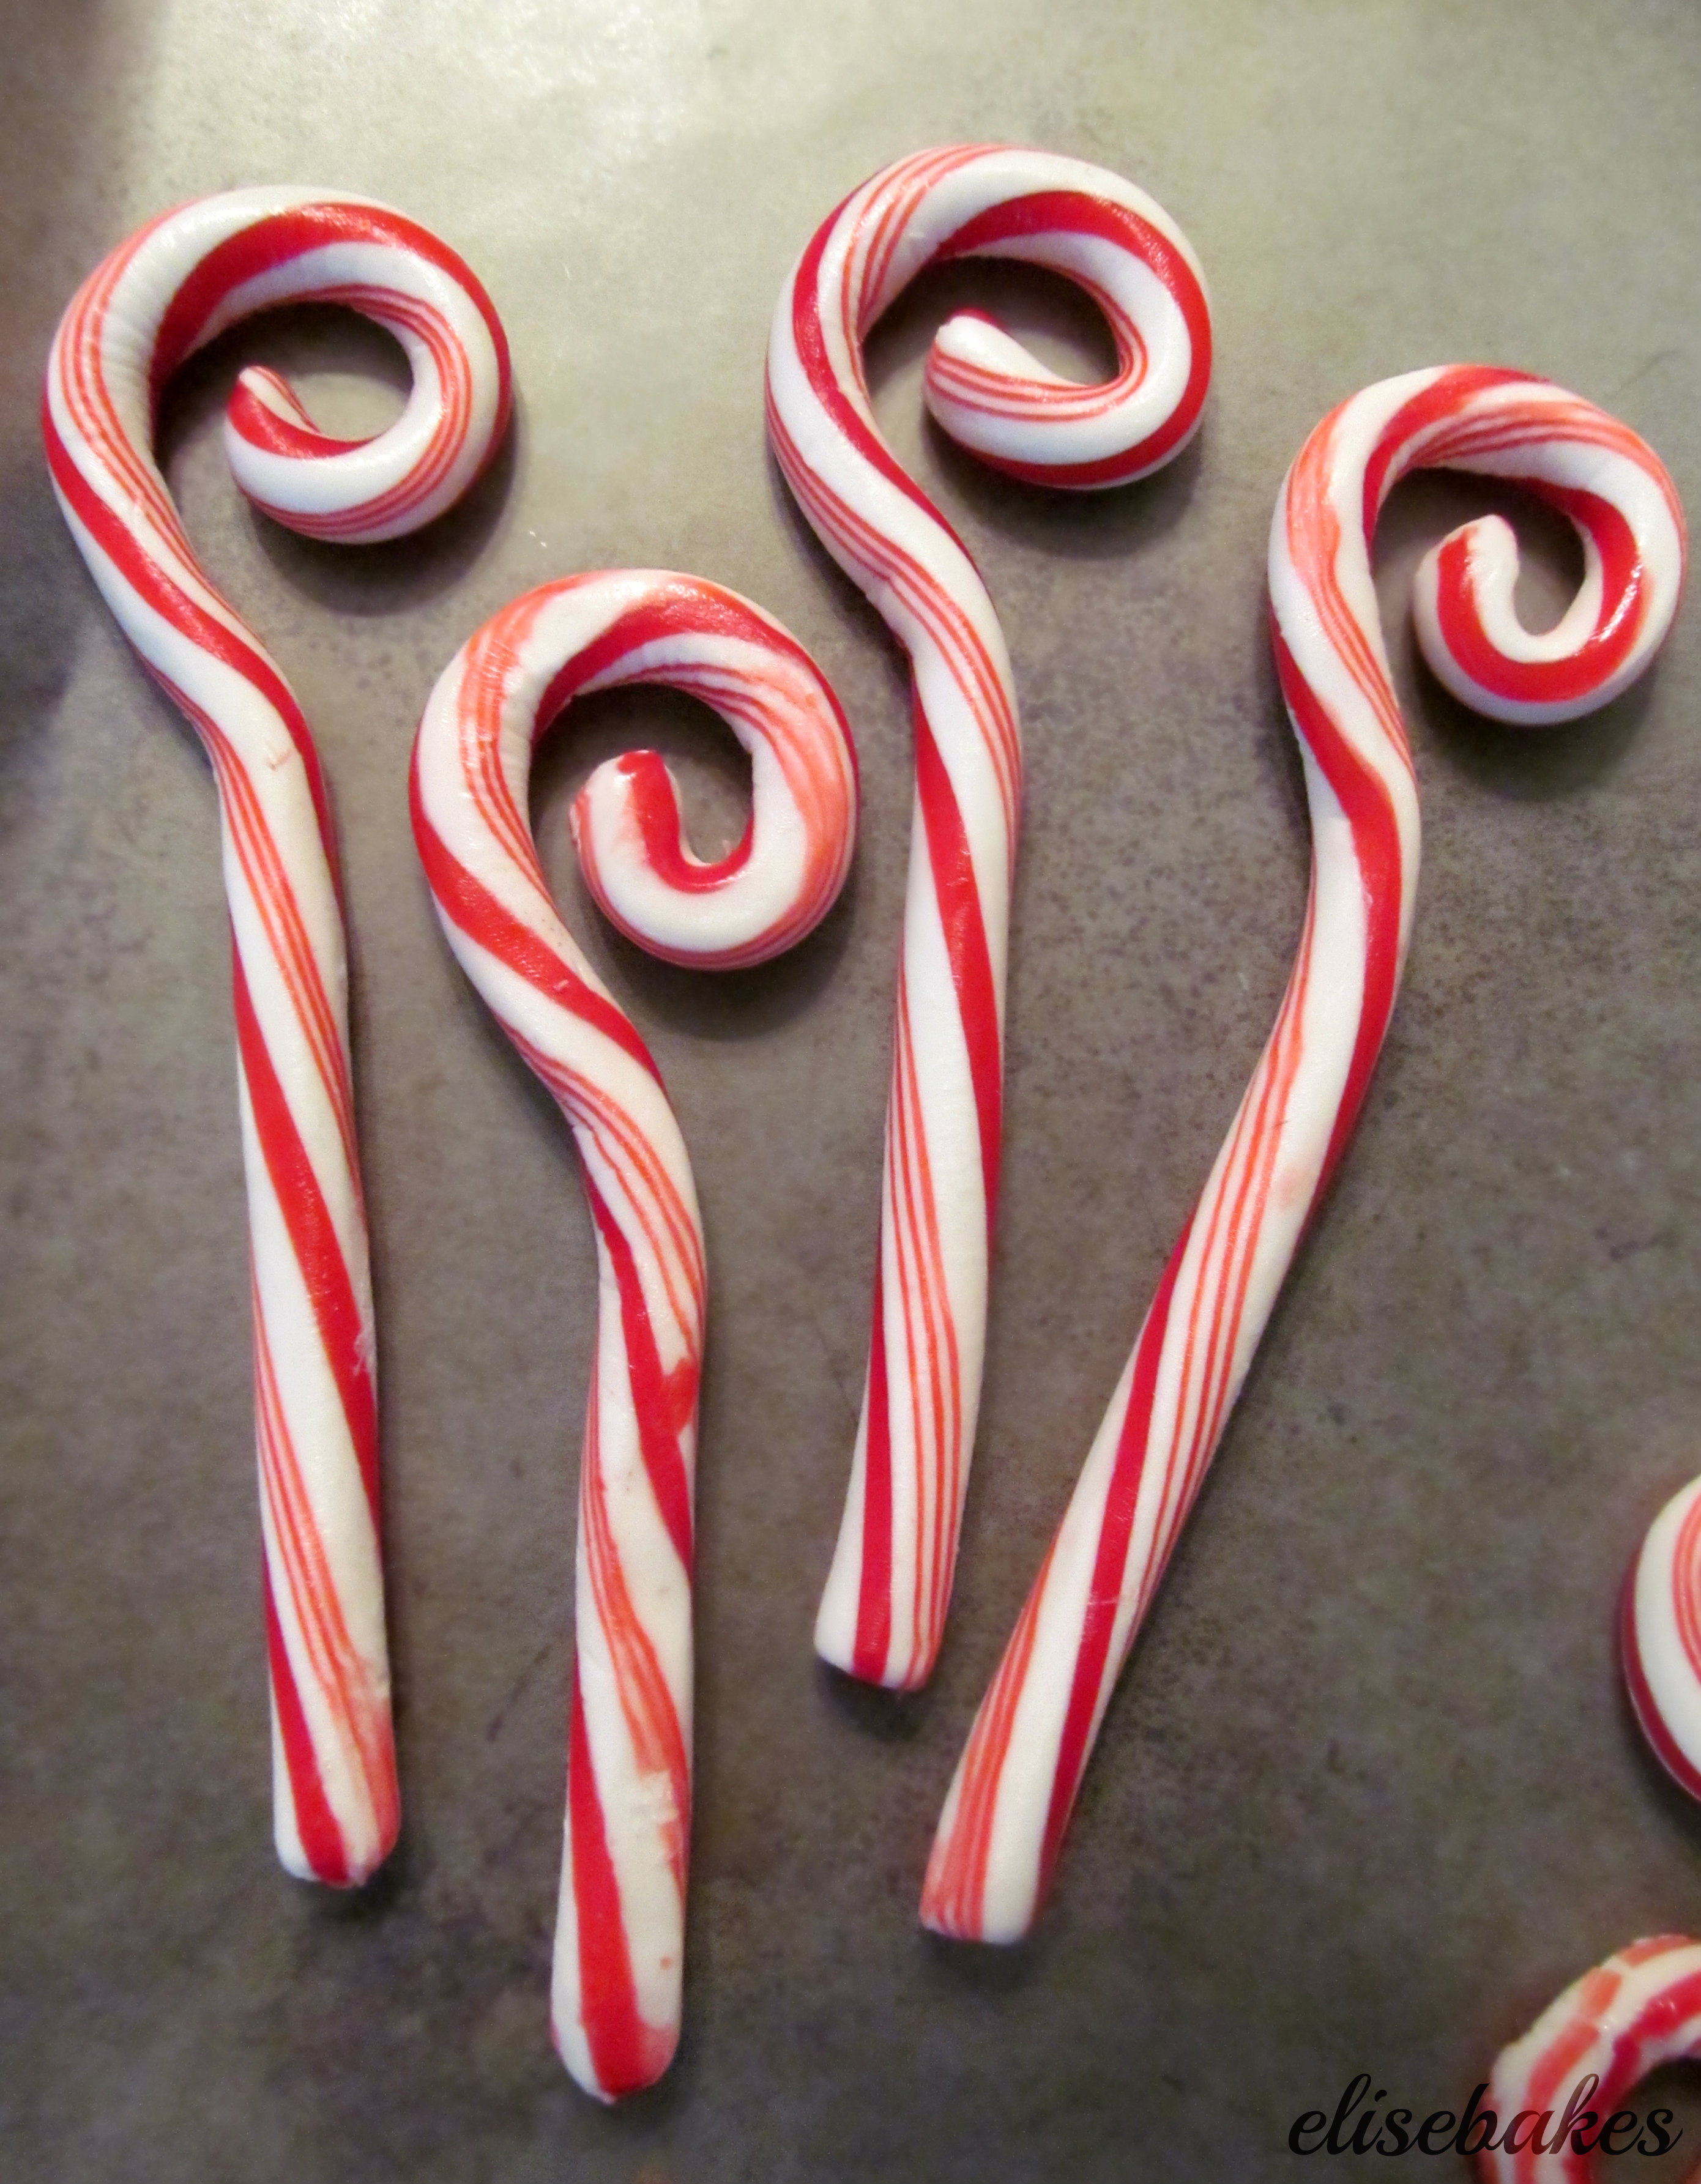 How to shape candy canes into a bishop's crozier for St. Nicholas Day